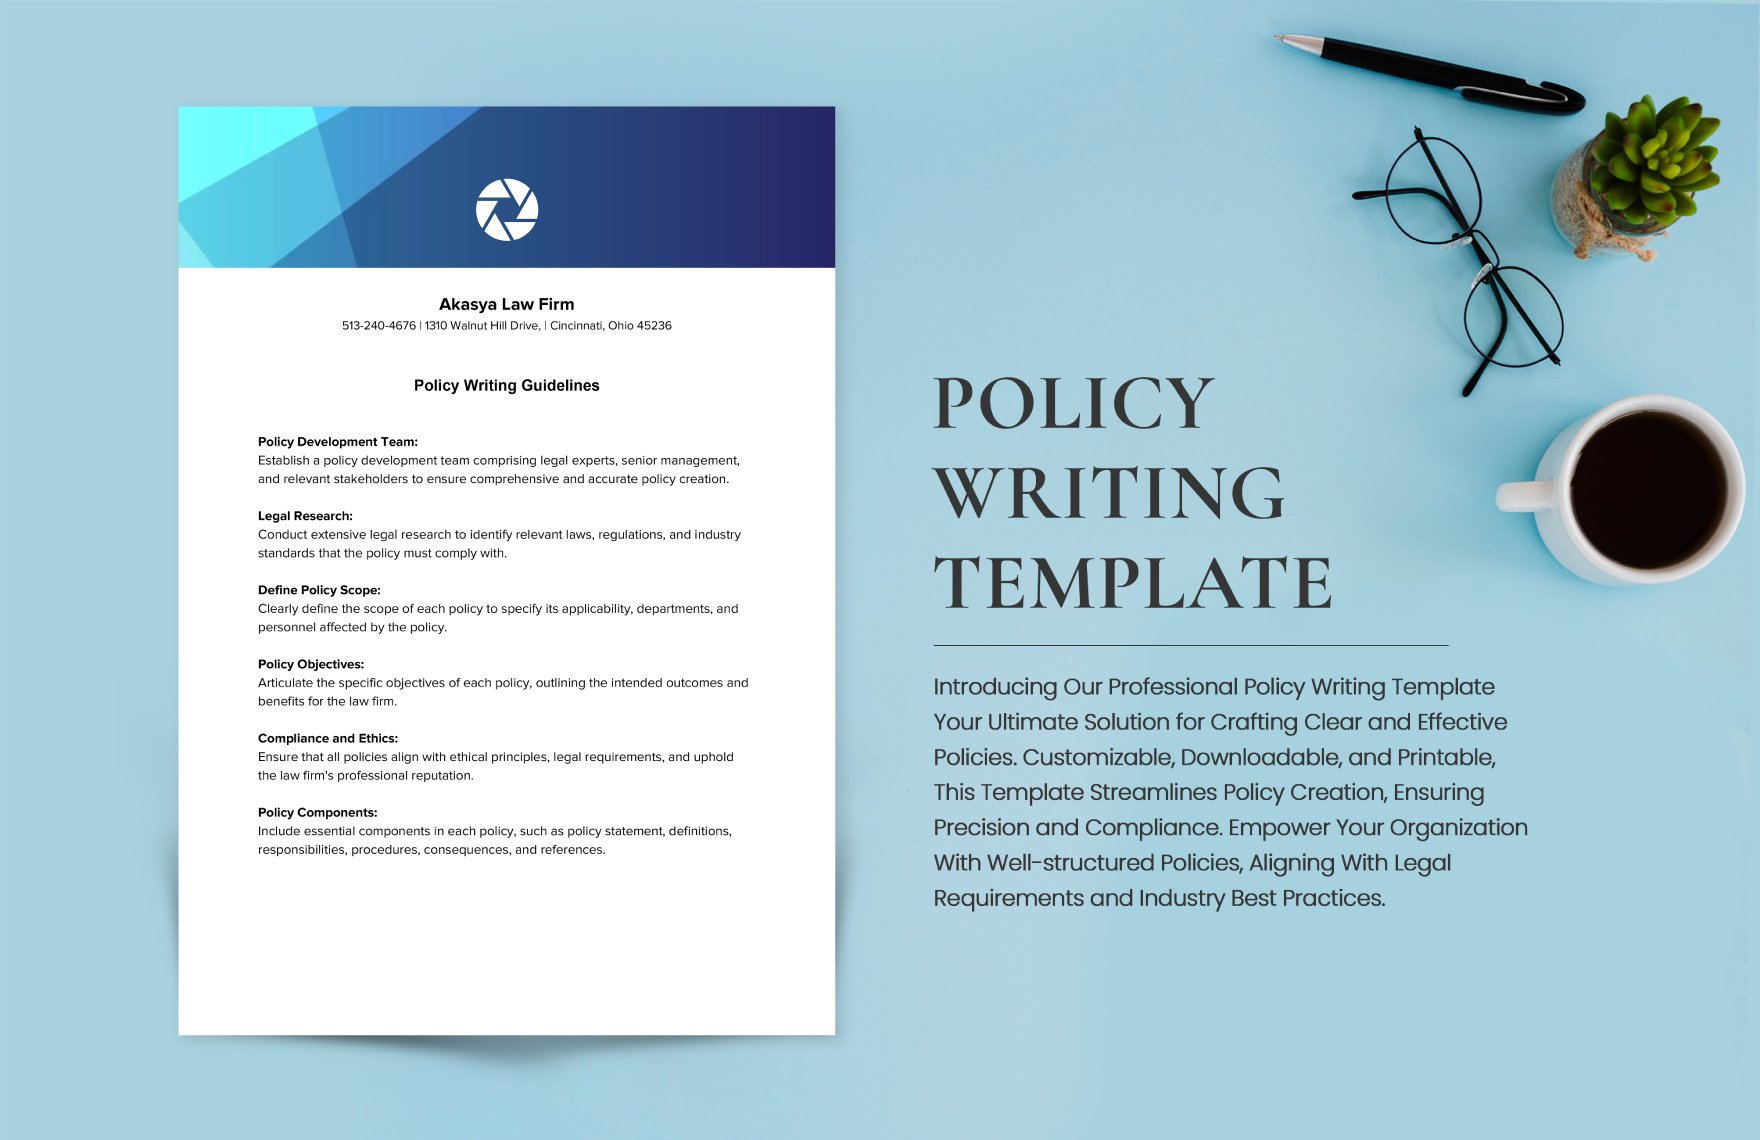 Policy Writing Template